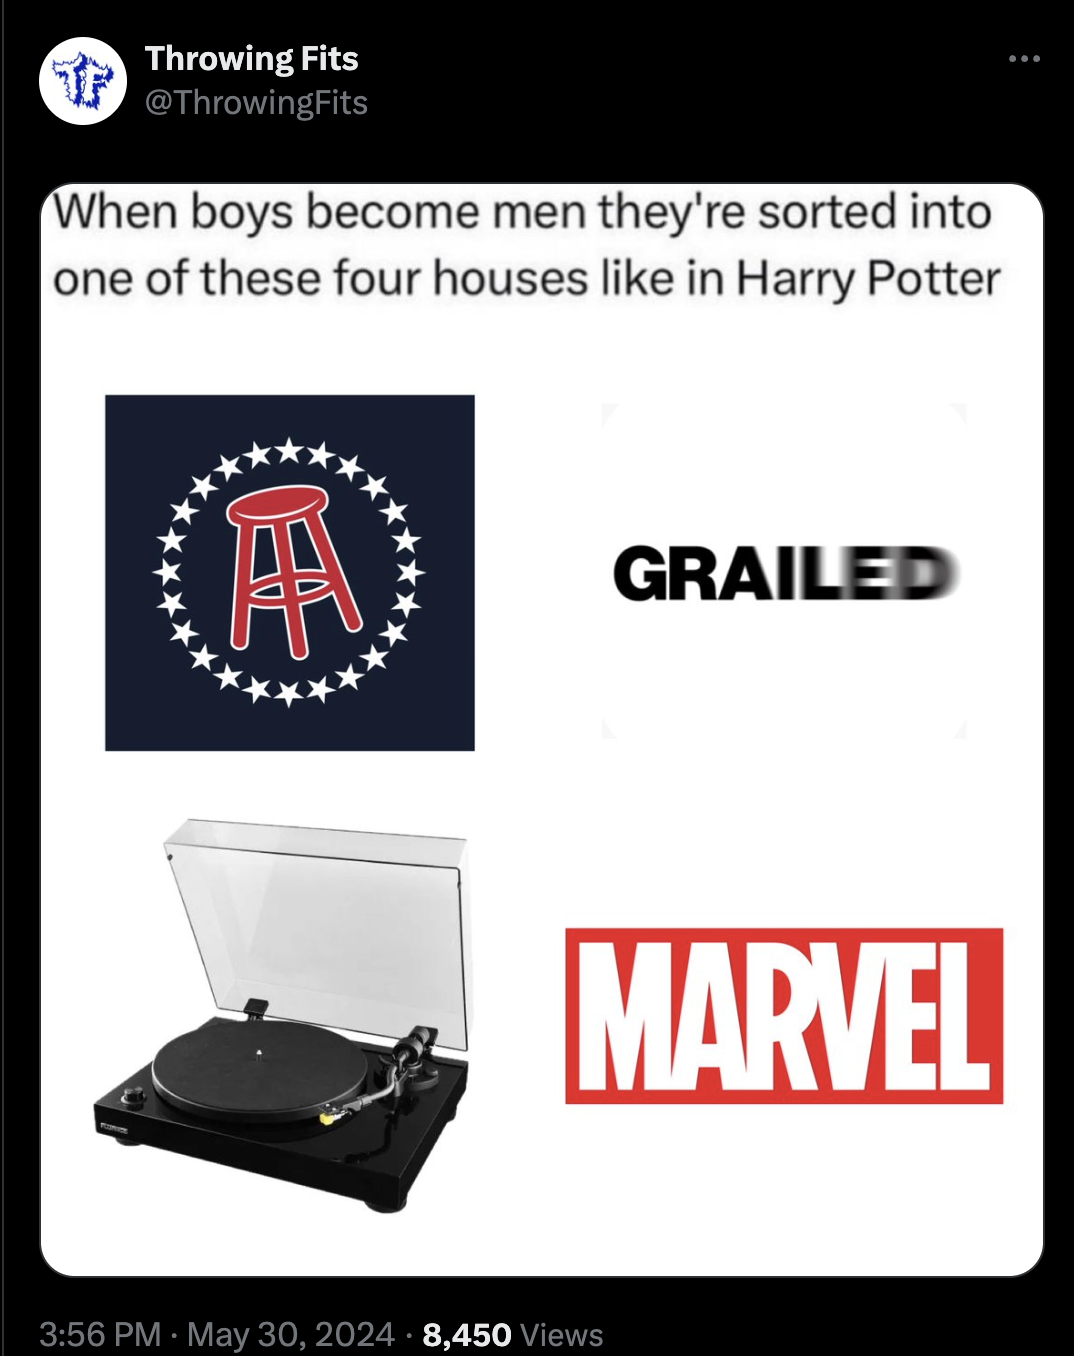 suitcase - Throwing Fits When boys become men they're sorted into one of these four houses in Harry Potter A Grailed Marvel 8,450 Views